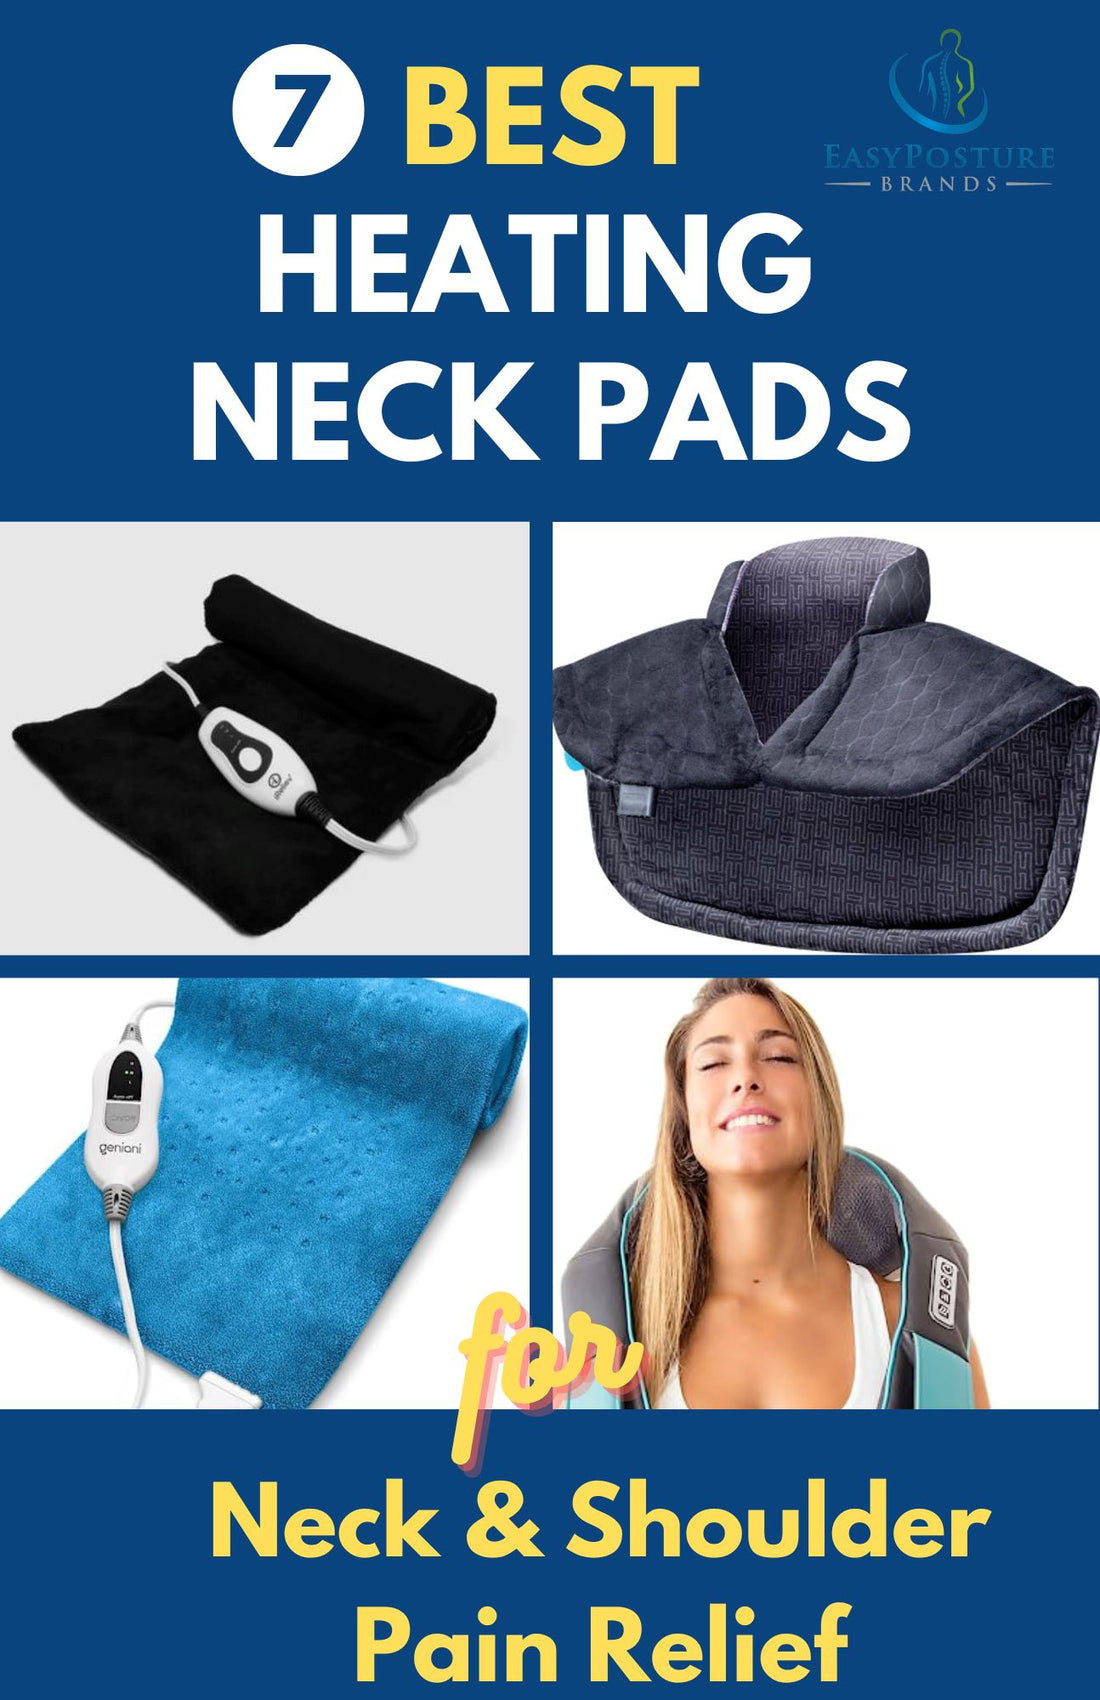 7 Best Heating Neck Pads for Neck Pain Relief (What Buyers Loved!)